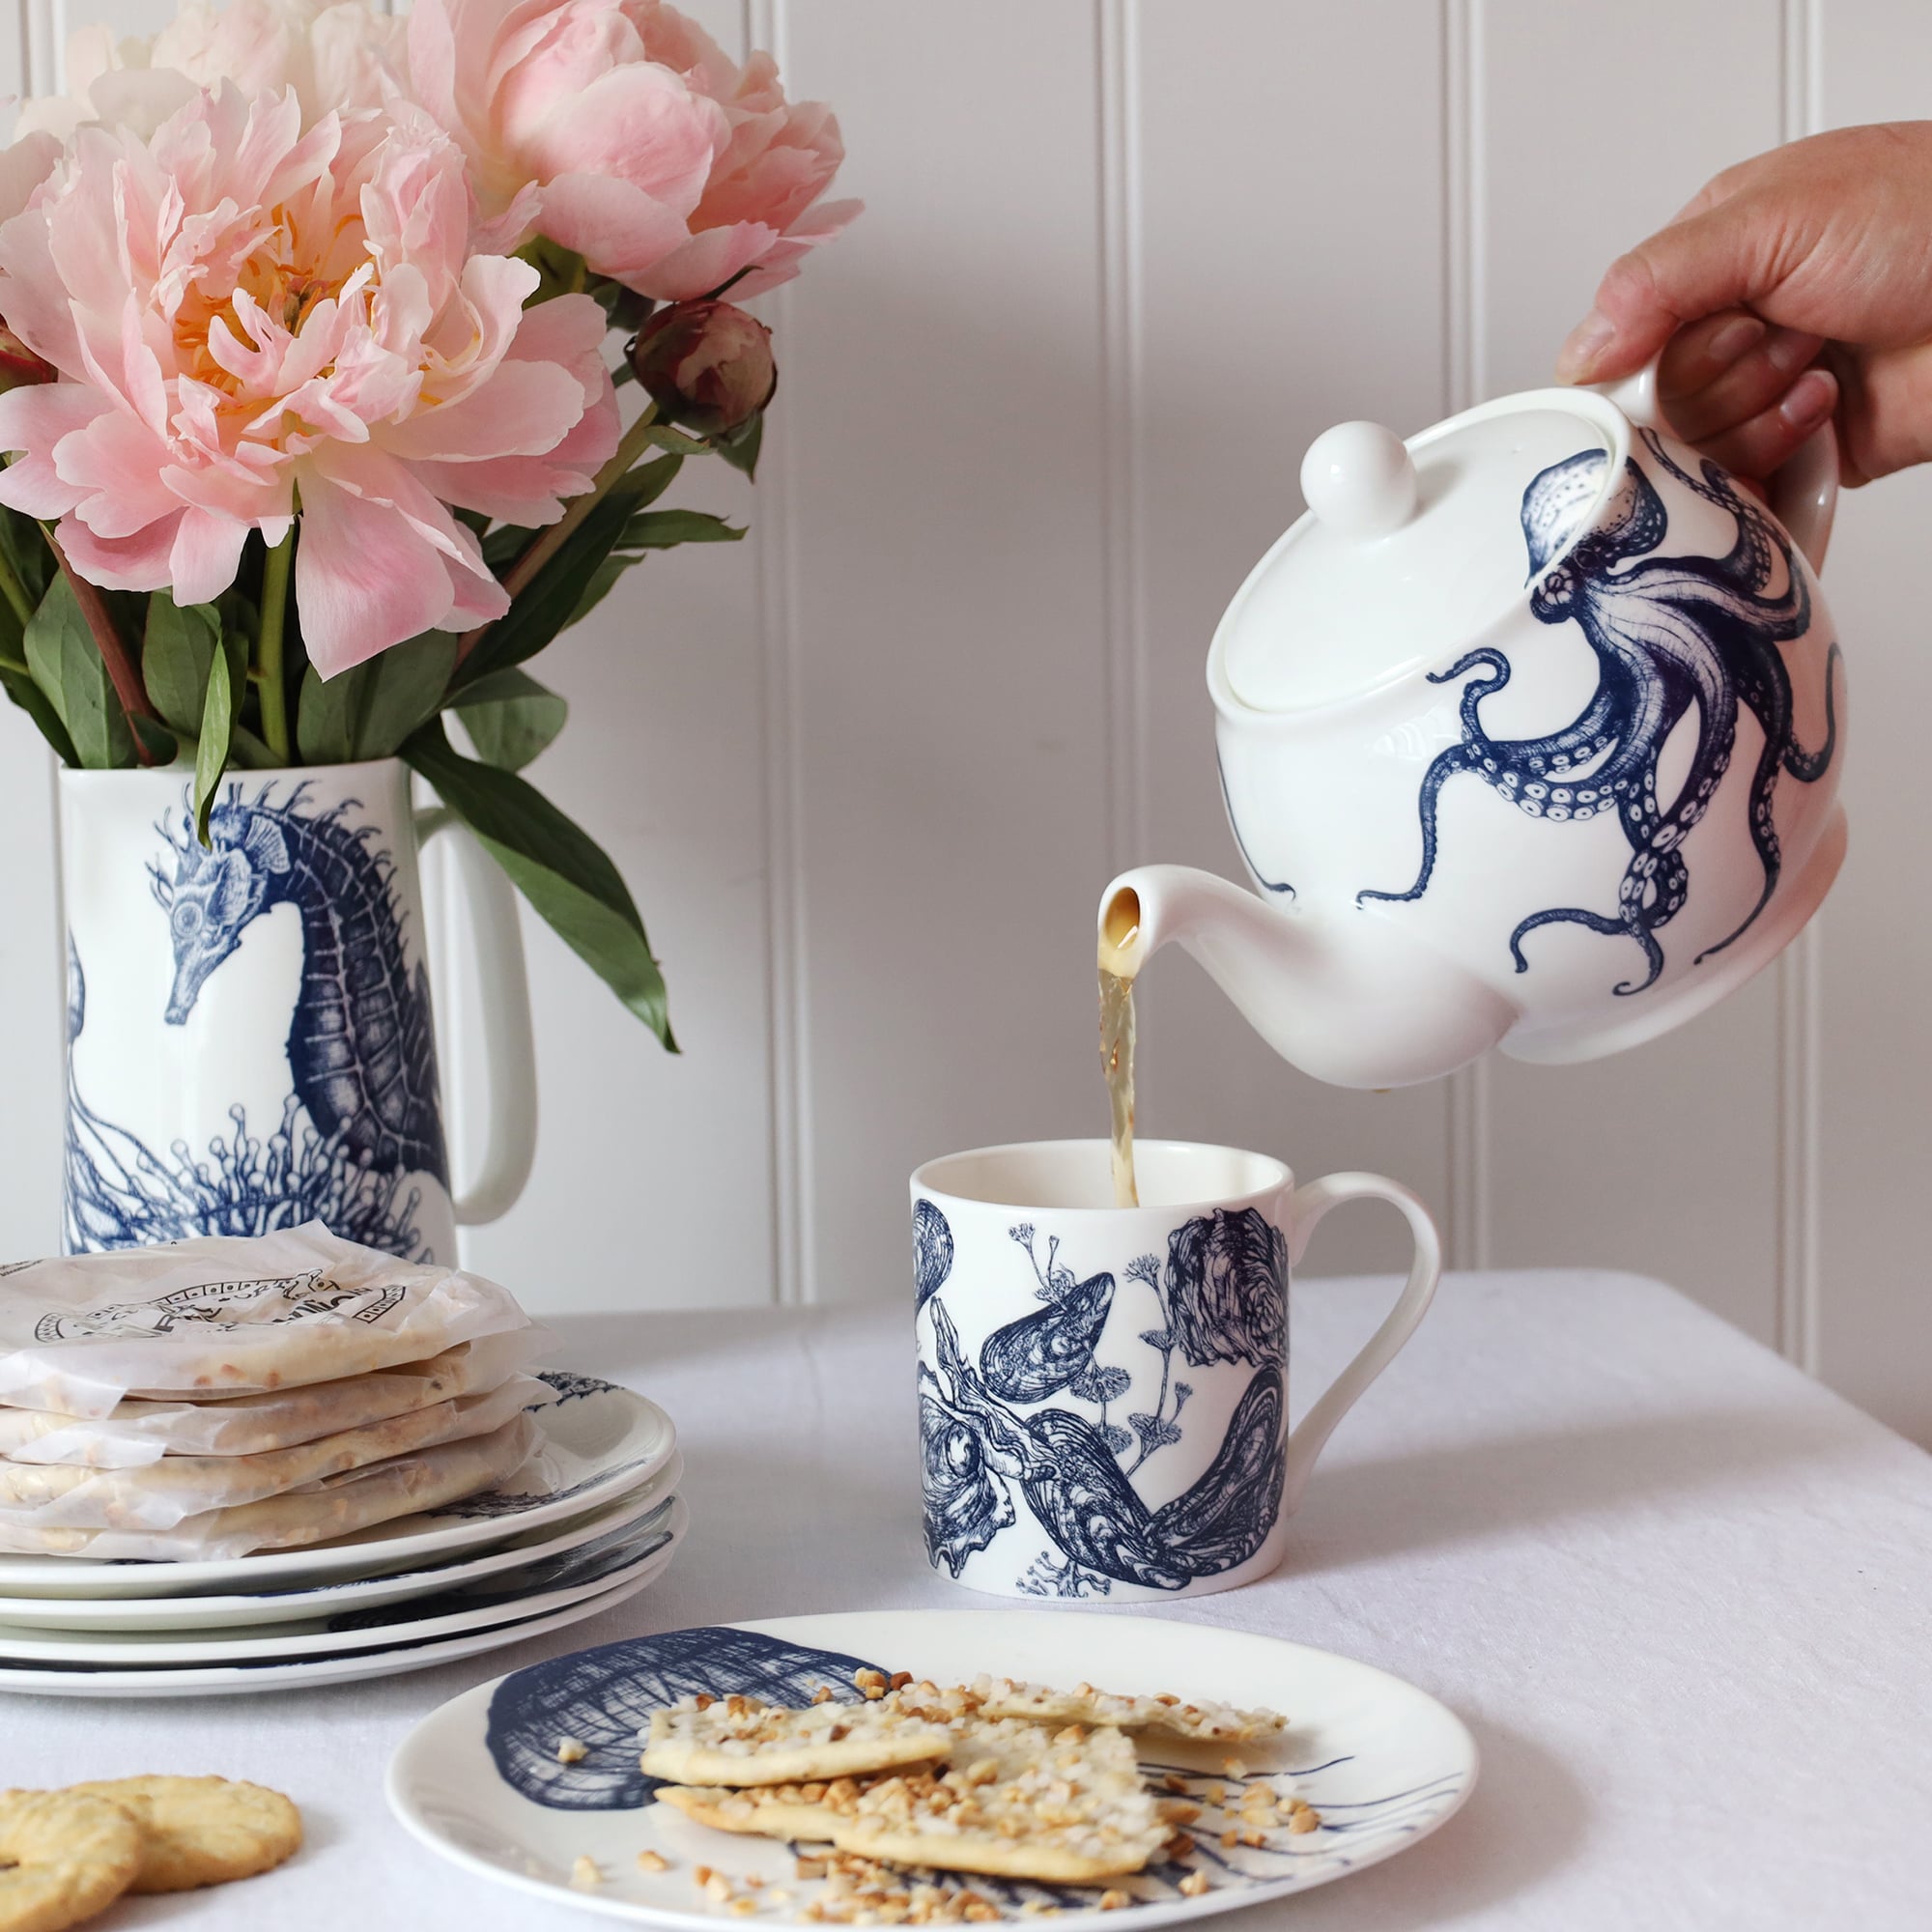 A blue & white informal; table setting set against a white shiplap wall and linen tablecloth. An octopus design adorns a teapot which is pouring tea into a white bone china mug decorated with a blue illustrated  mussel & oyster shell design..